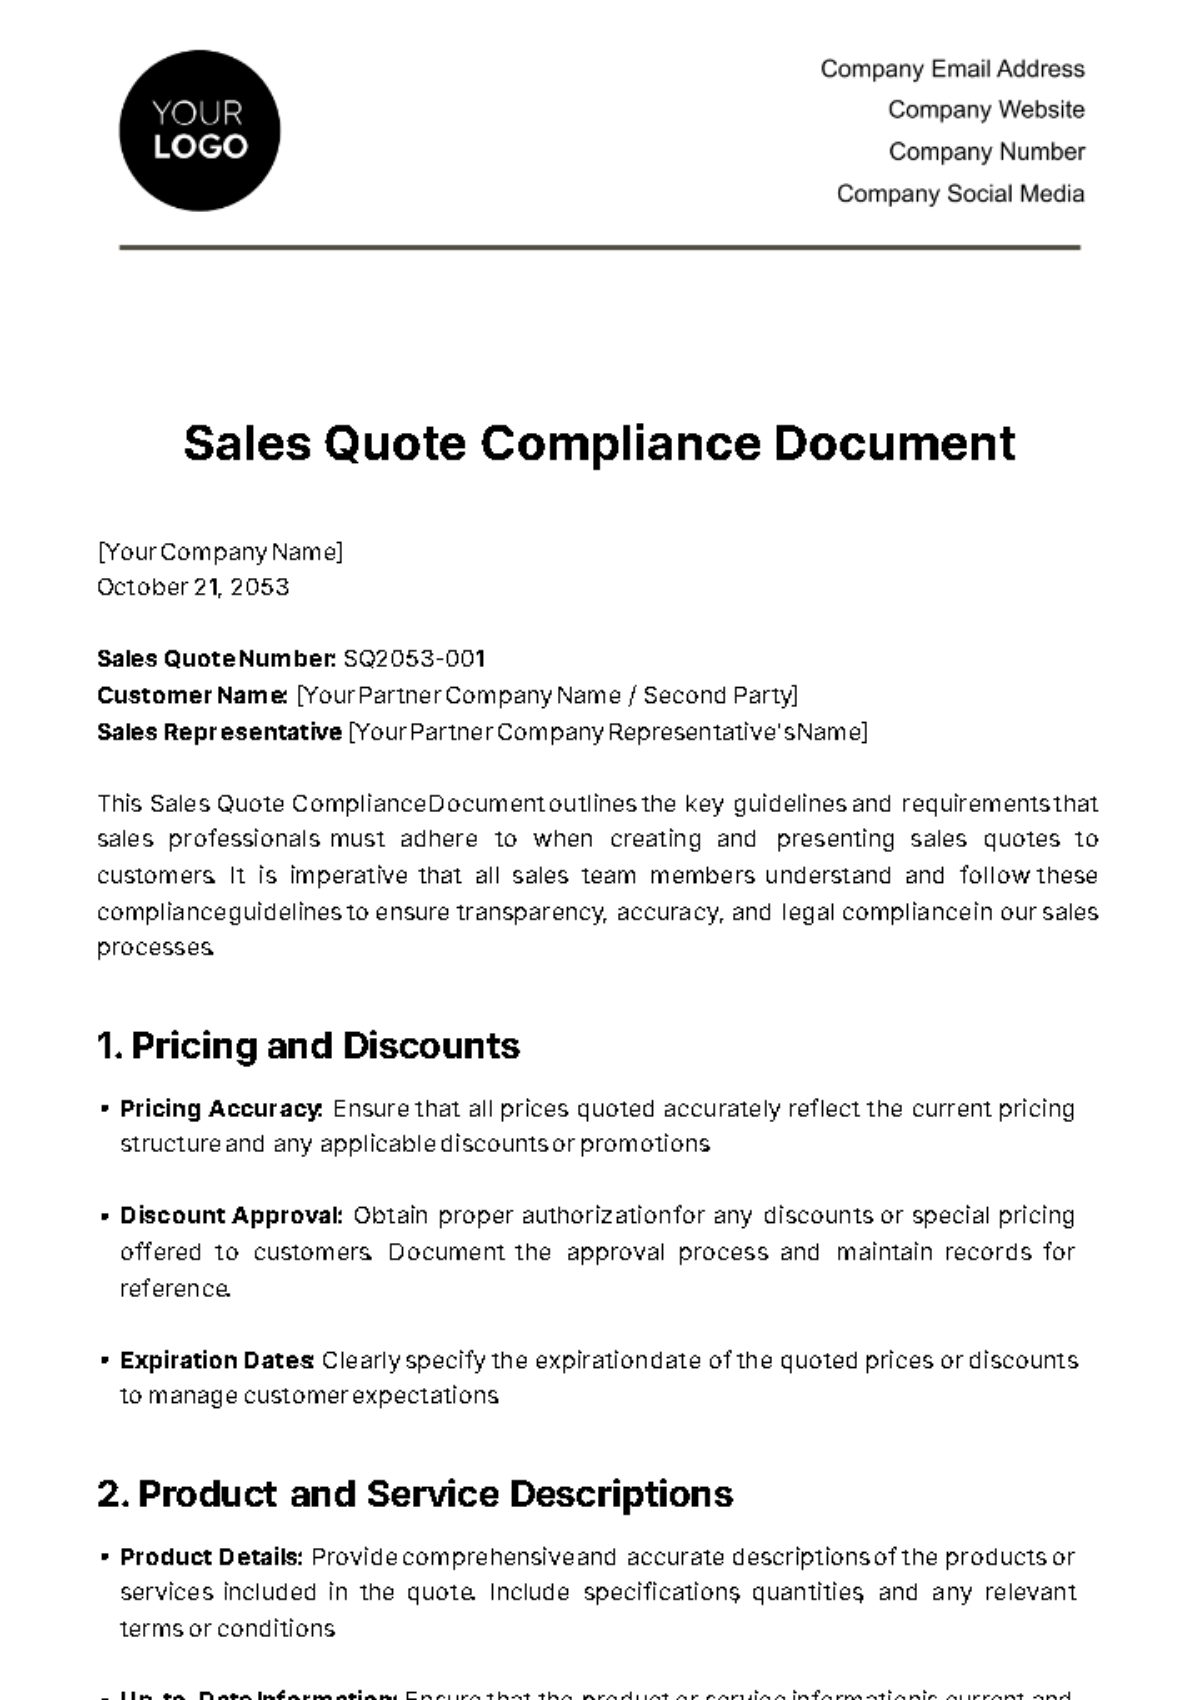 Free Sales Quote Compliance Document Template